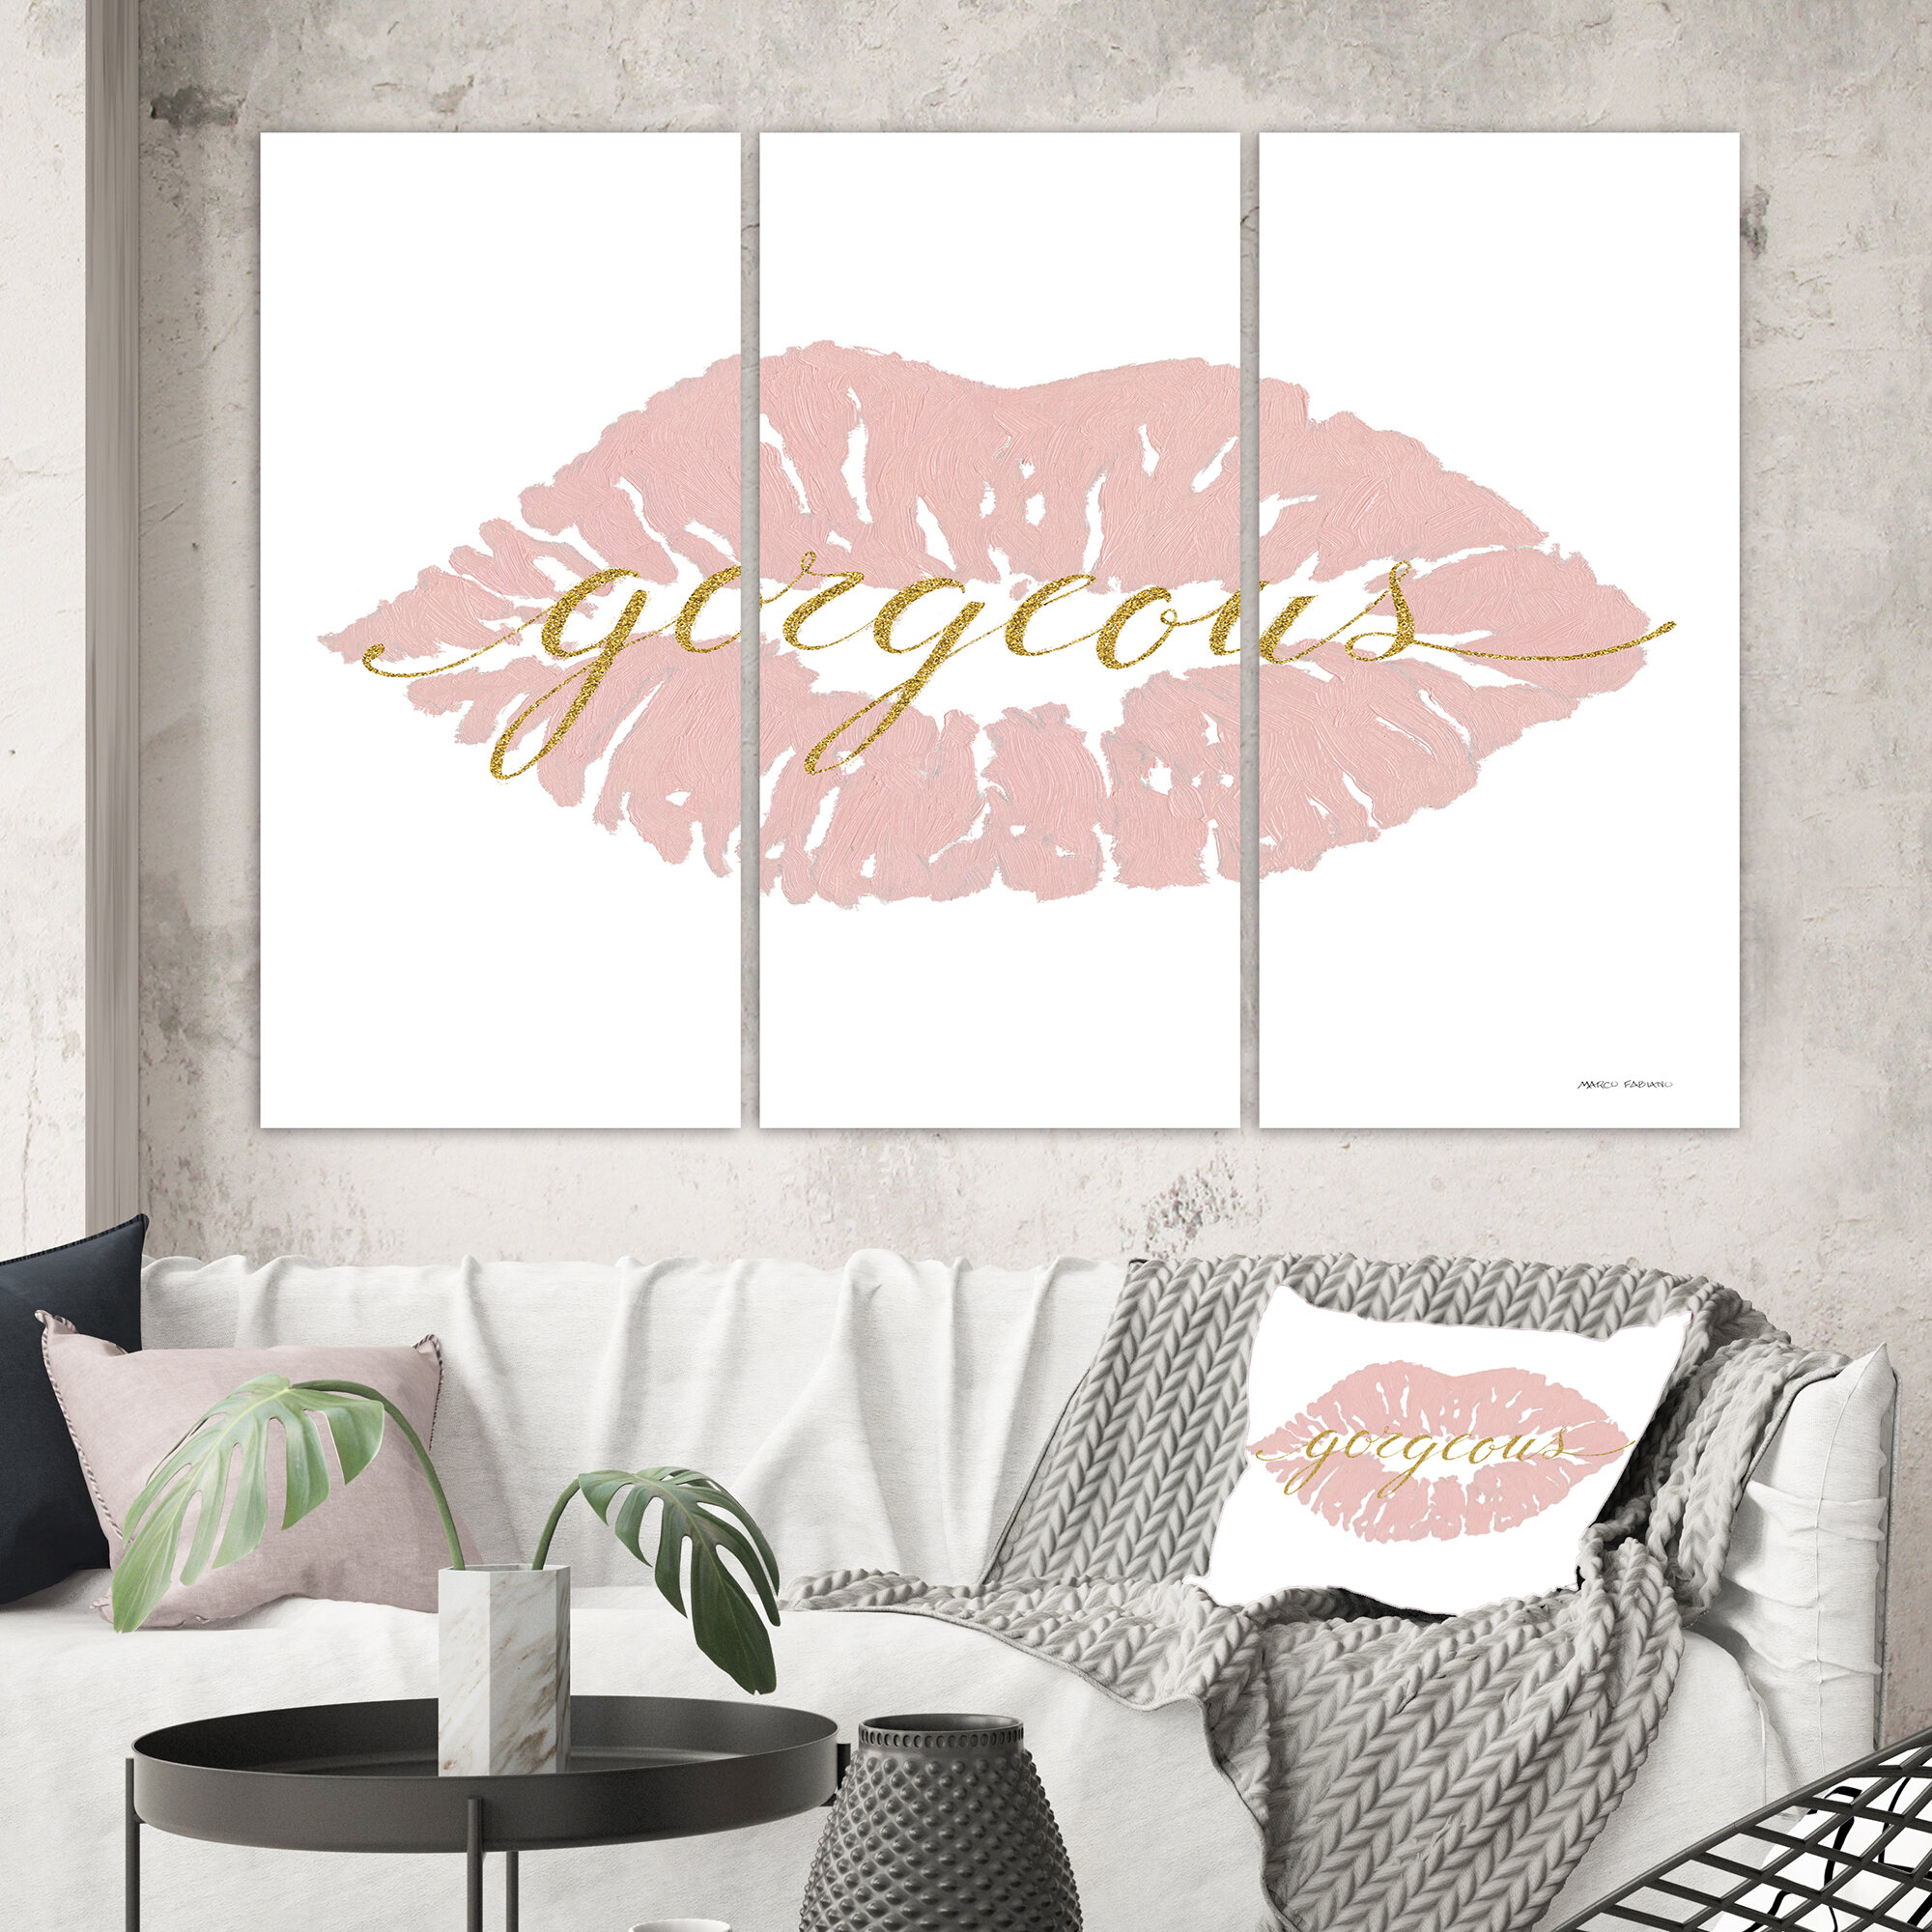 Posh & Luxe 'Fashion Glam Lips on Gold II' Graphic Art Multi-Piece Image on Canvas East Urban Home Size: 28 H x 36 W x 1 D